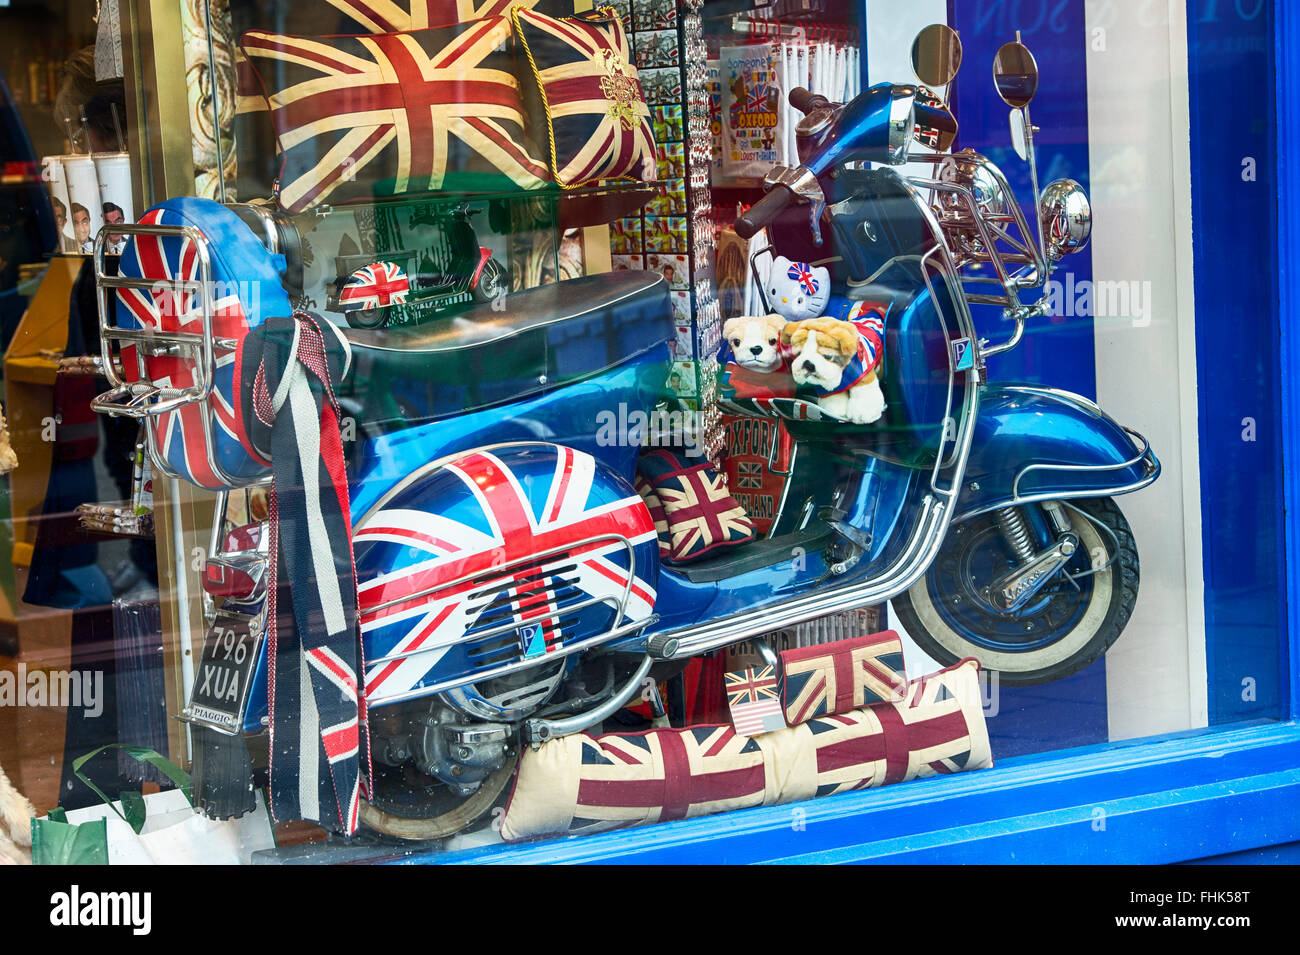 Mods vespa scooter and union jack products in a shop window display. Oxford, England Stock Photo